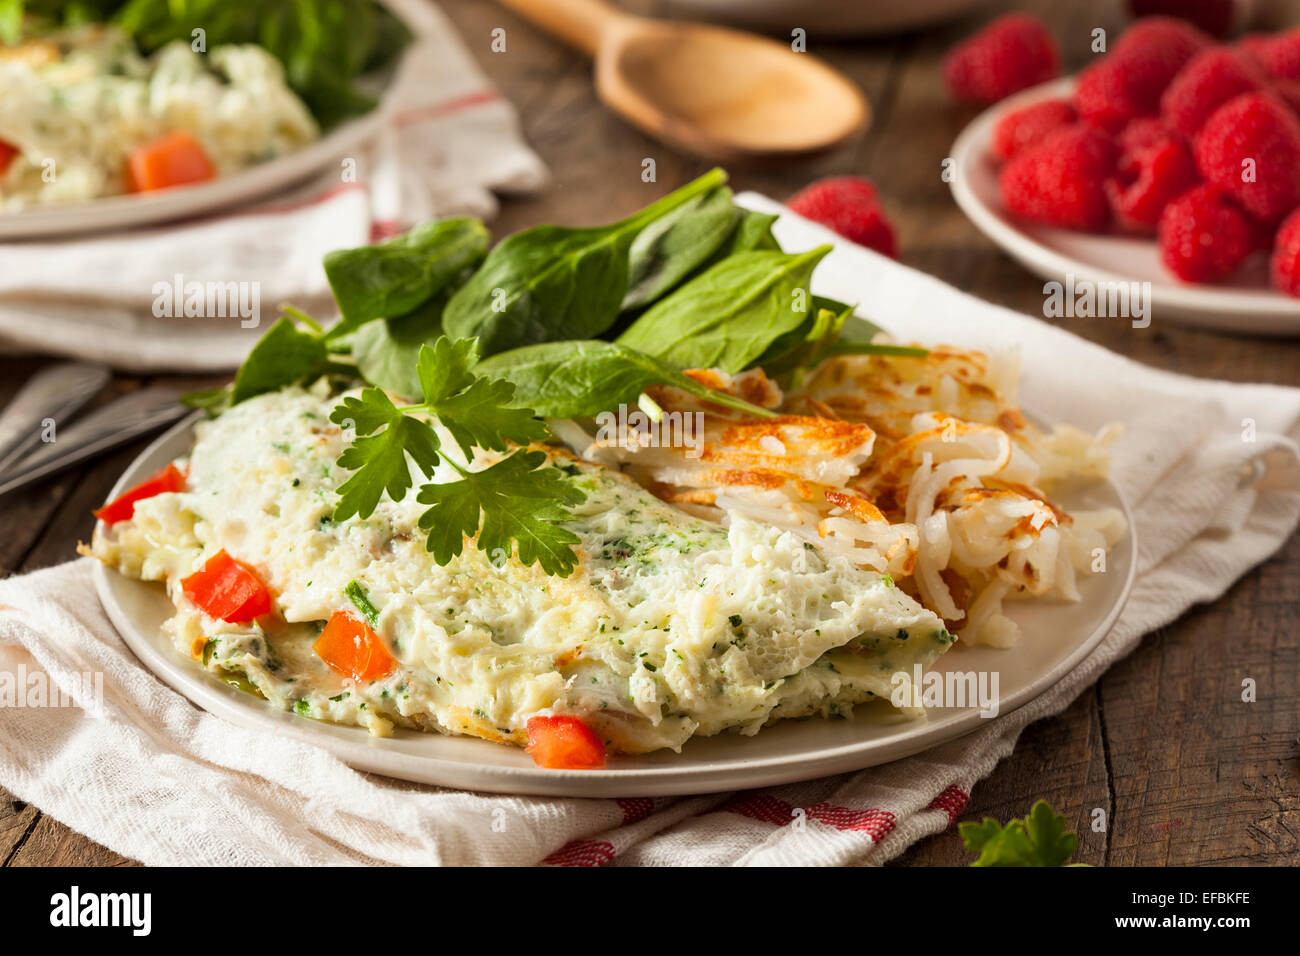 Healthy Spinach Egg White Omelette with Tomatos Stock Photo